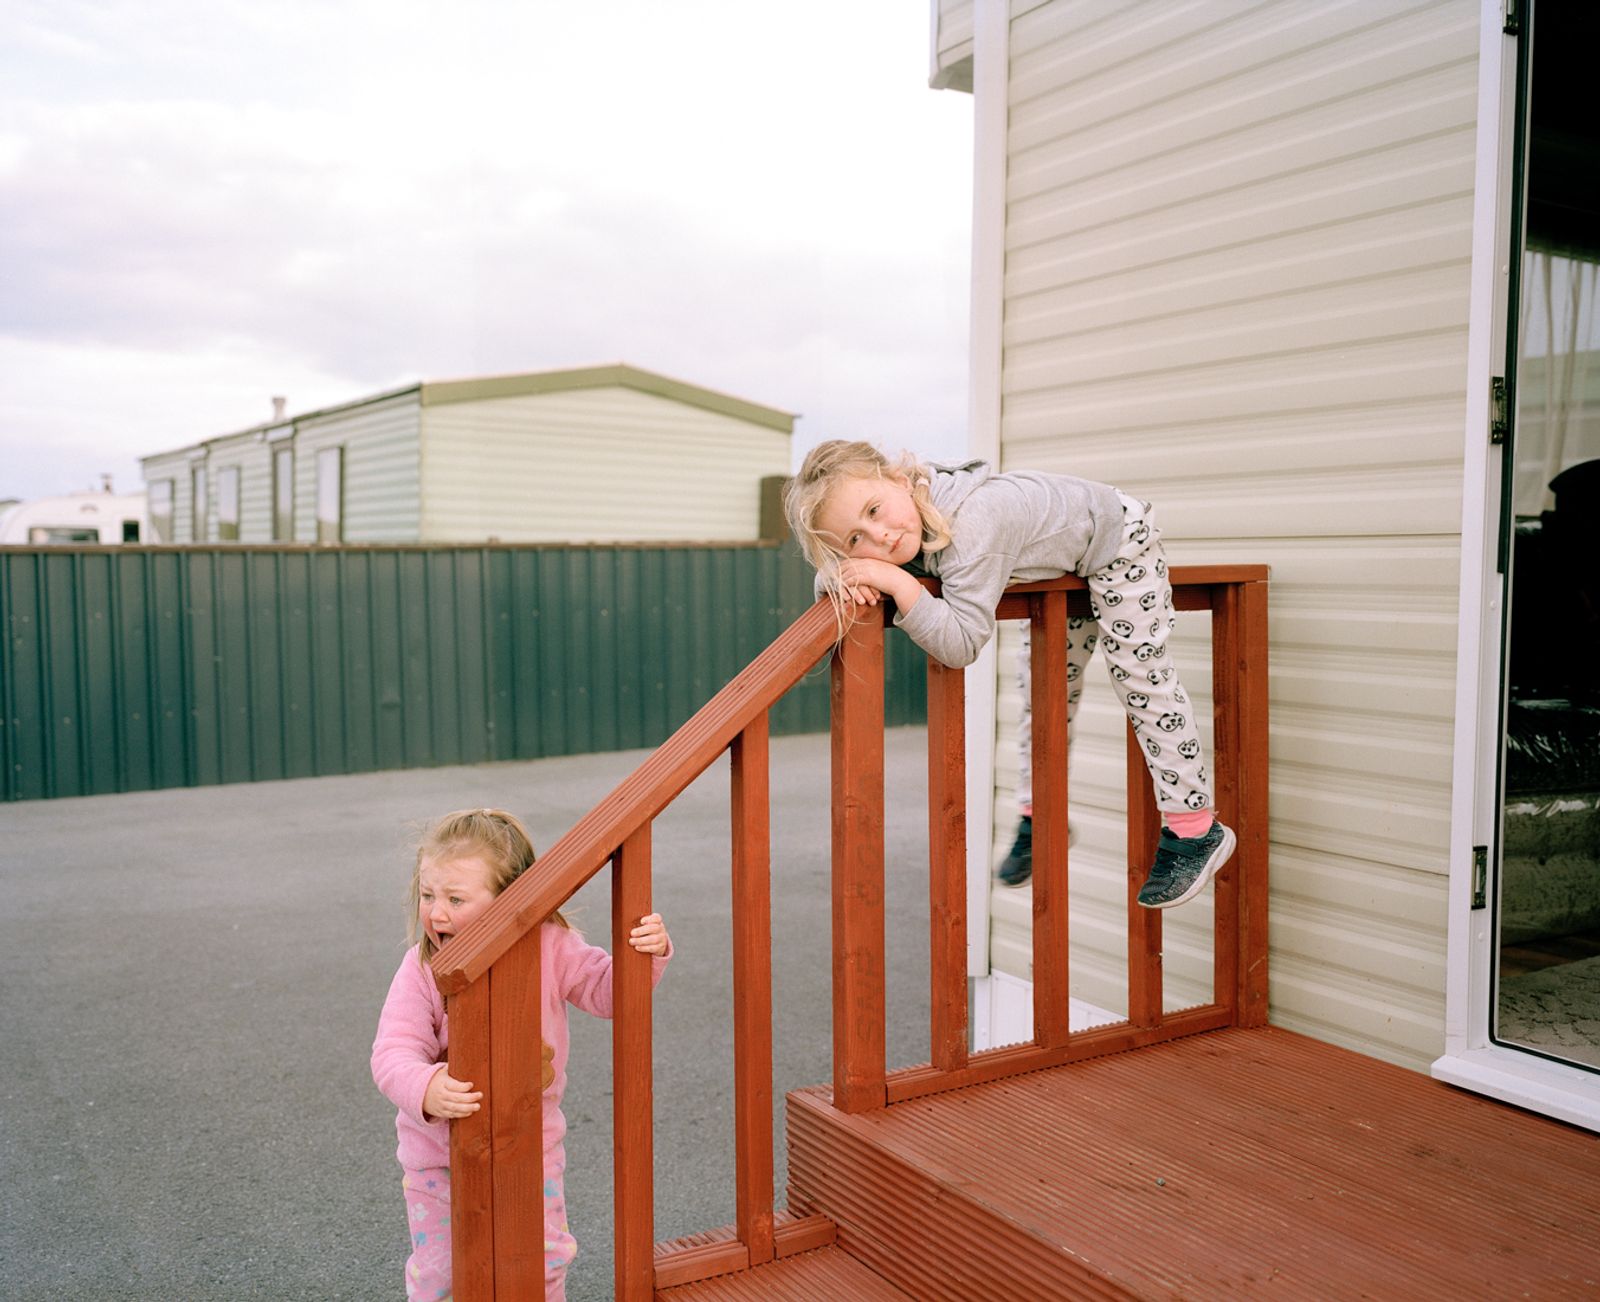 © Tamara Eckhardt - Image from the The Children of Carrowbrowne photography project